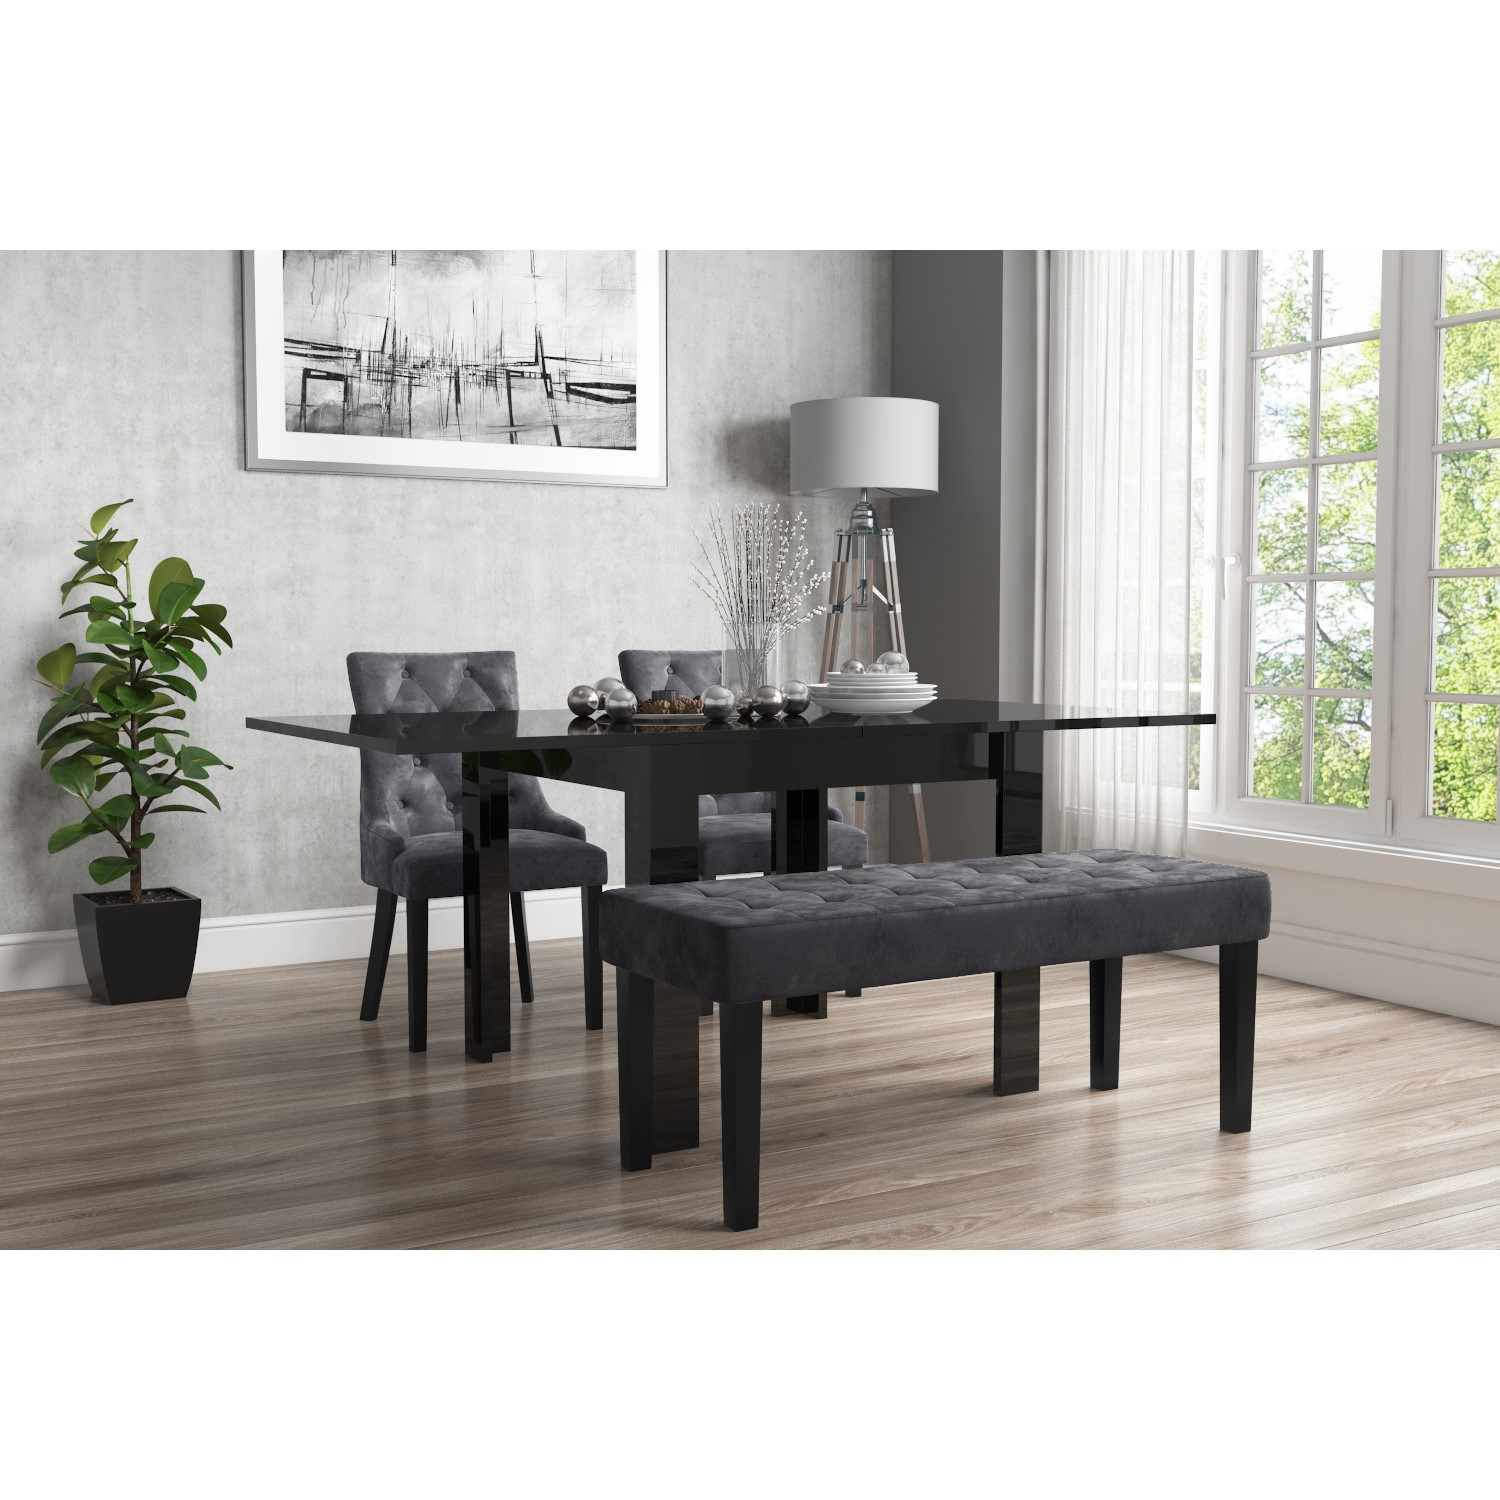 Flip Top Dining Table In Black High, Black Kitchen Table And Chairs Bench